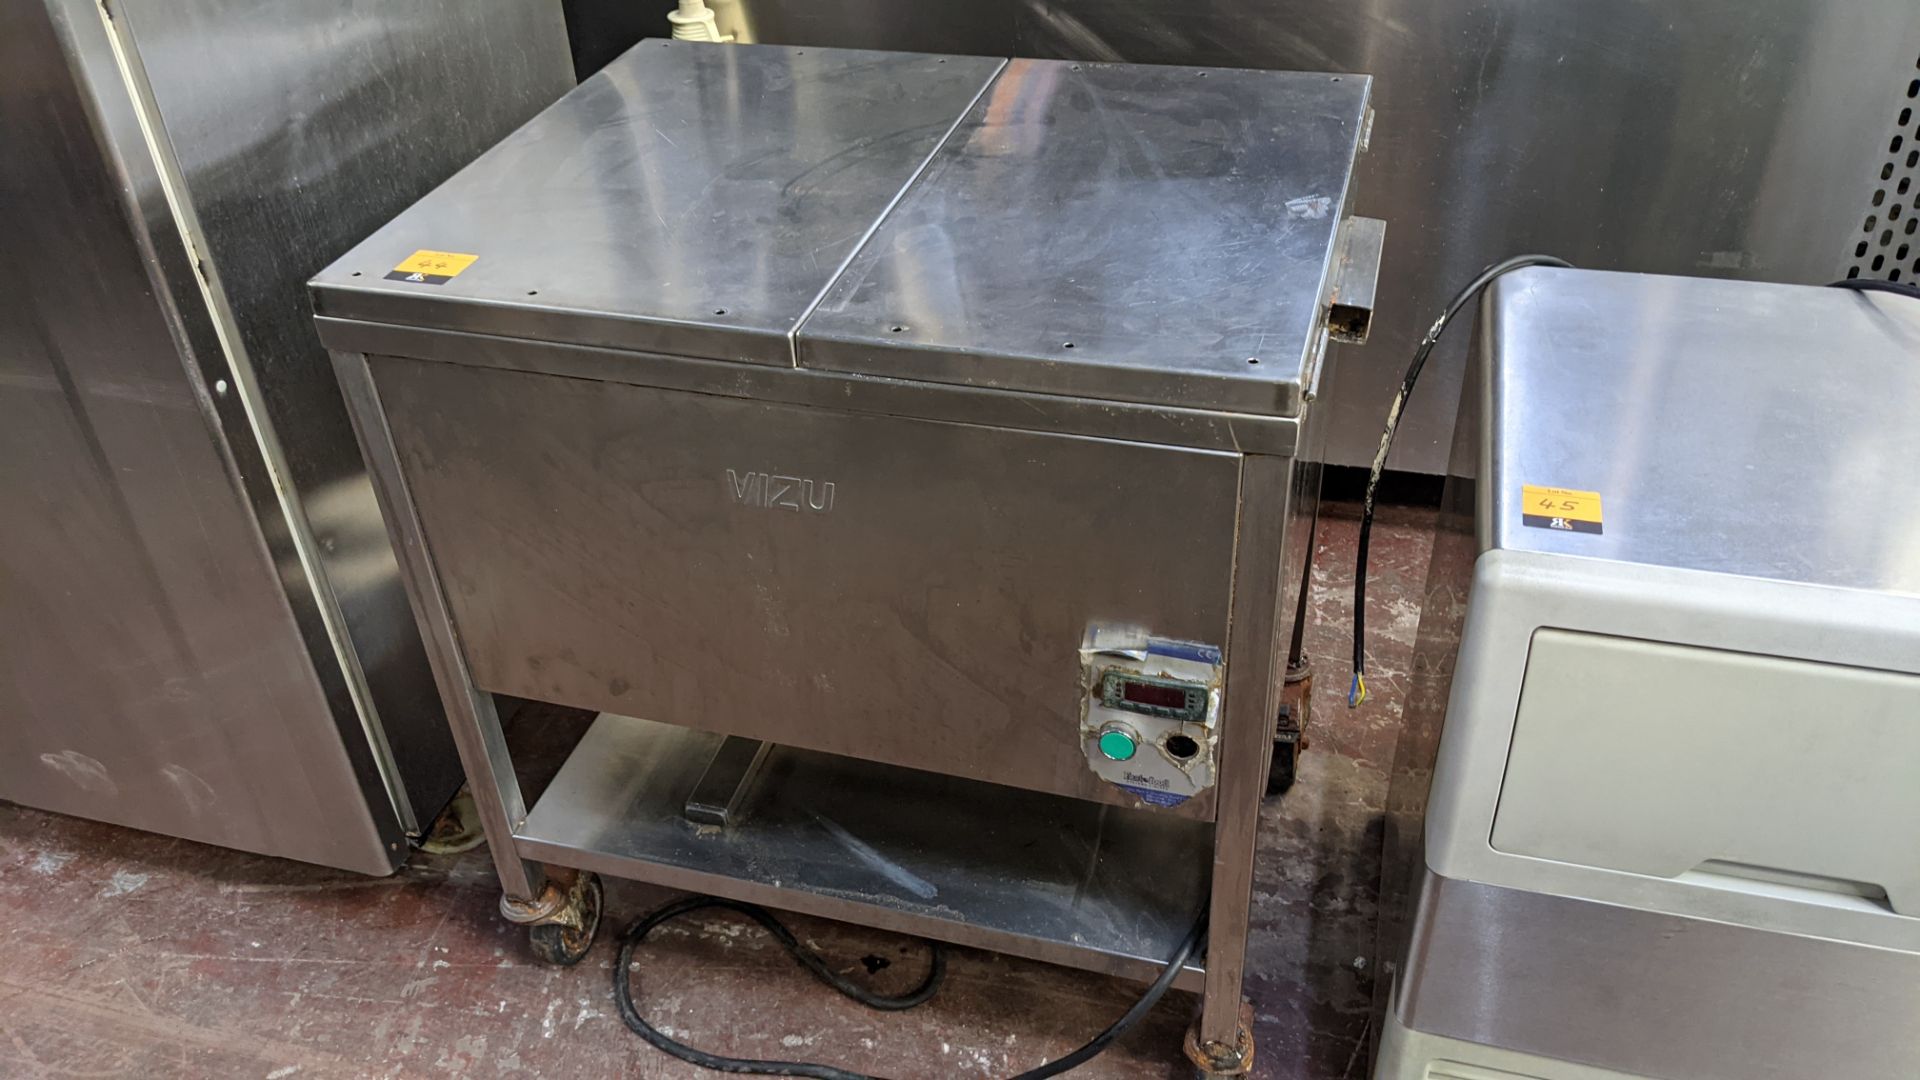 Vizu stainless steel breading table (chicken) - tray missing - Image 3 of 9